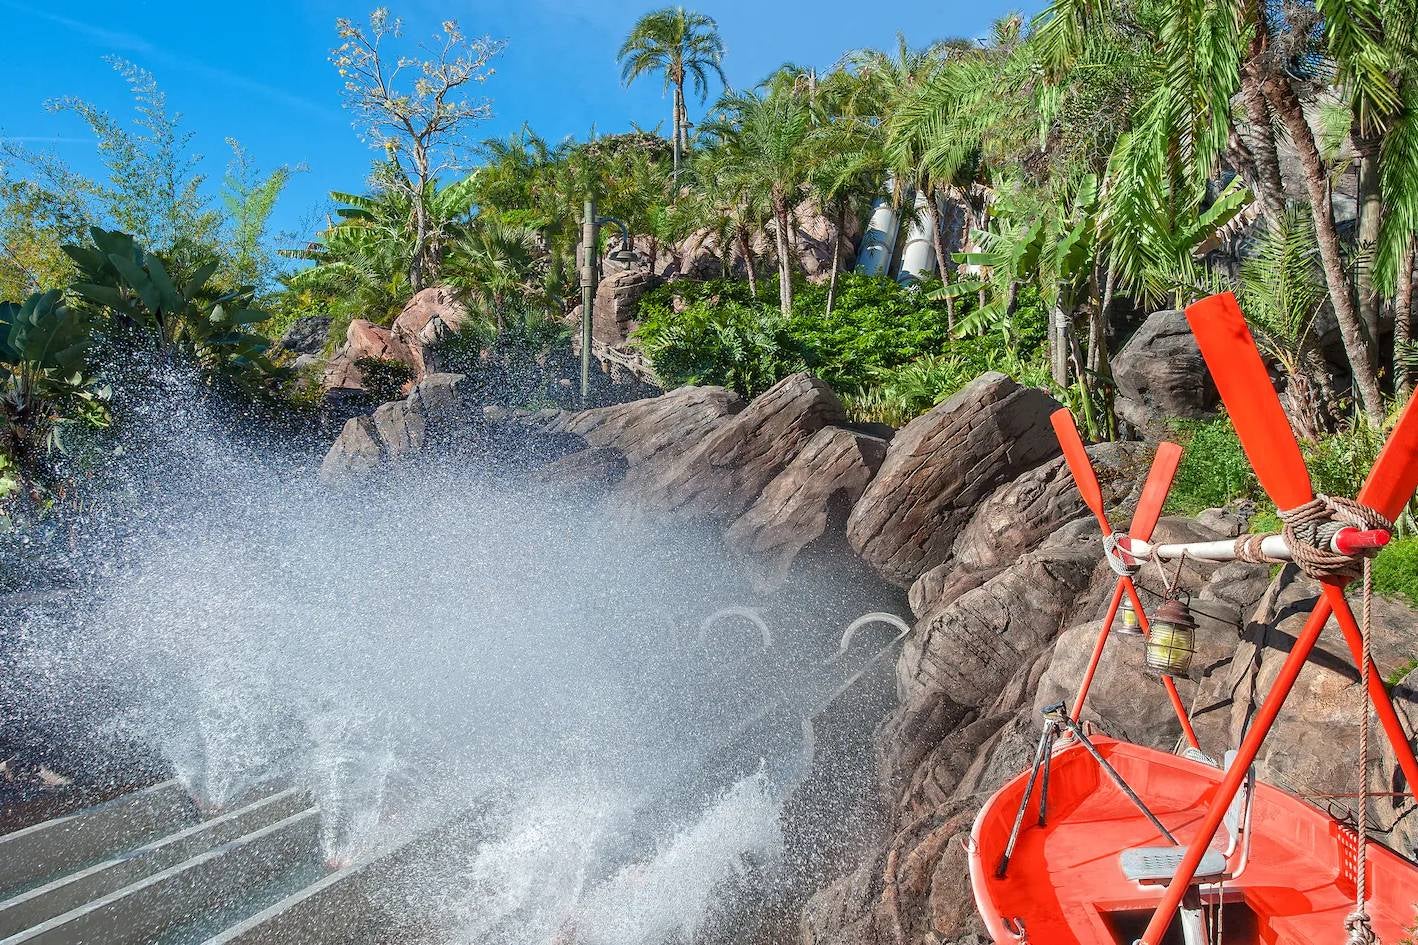 Walt Disney Parks has been sued by a woman who alleges she lost consciousness and suffered a brain injury after riding a slide at Typhoon lagoon